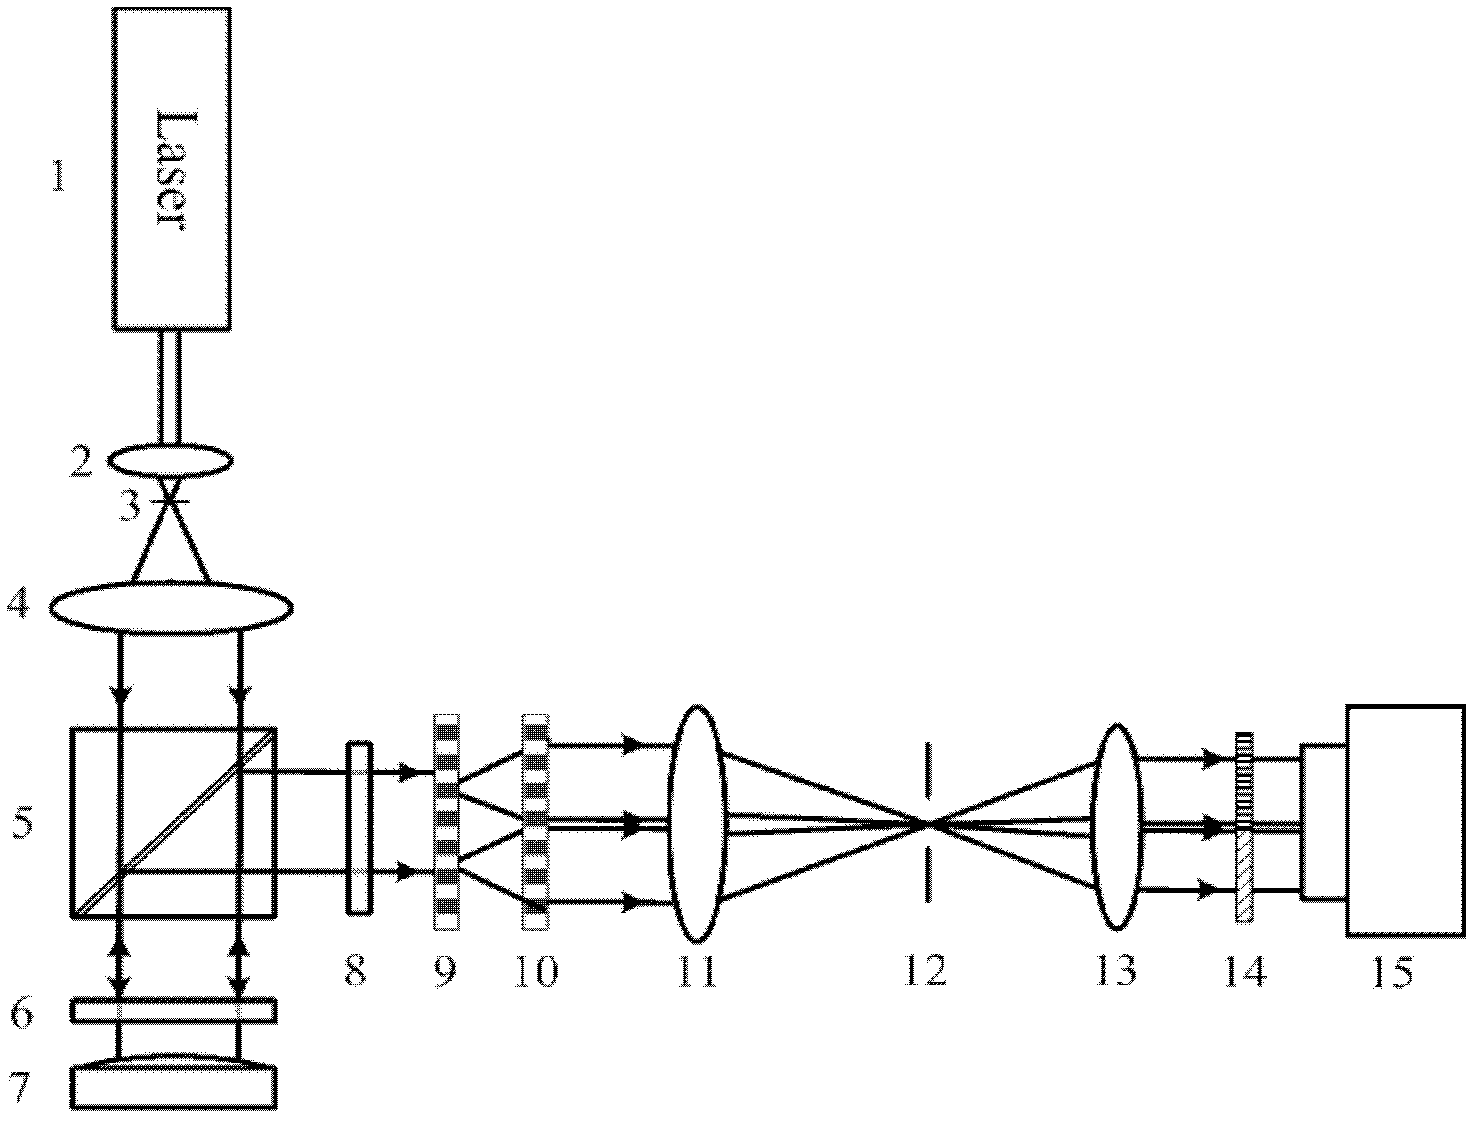 Synchronous phase-shifting Fizeau interference device capable of measuring in real time